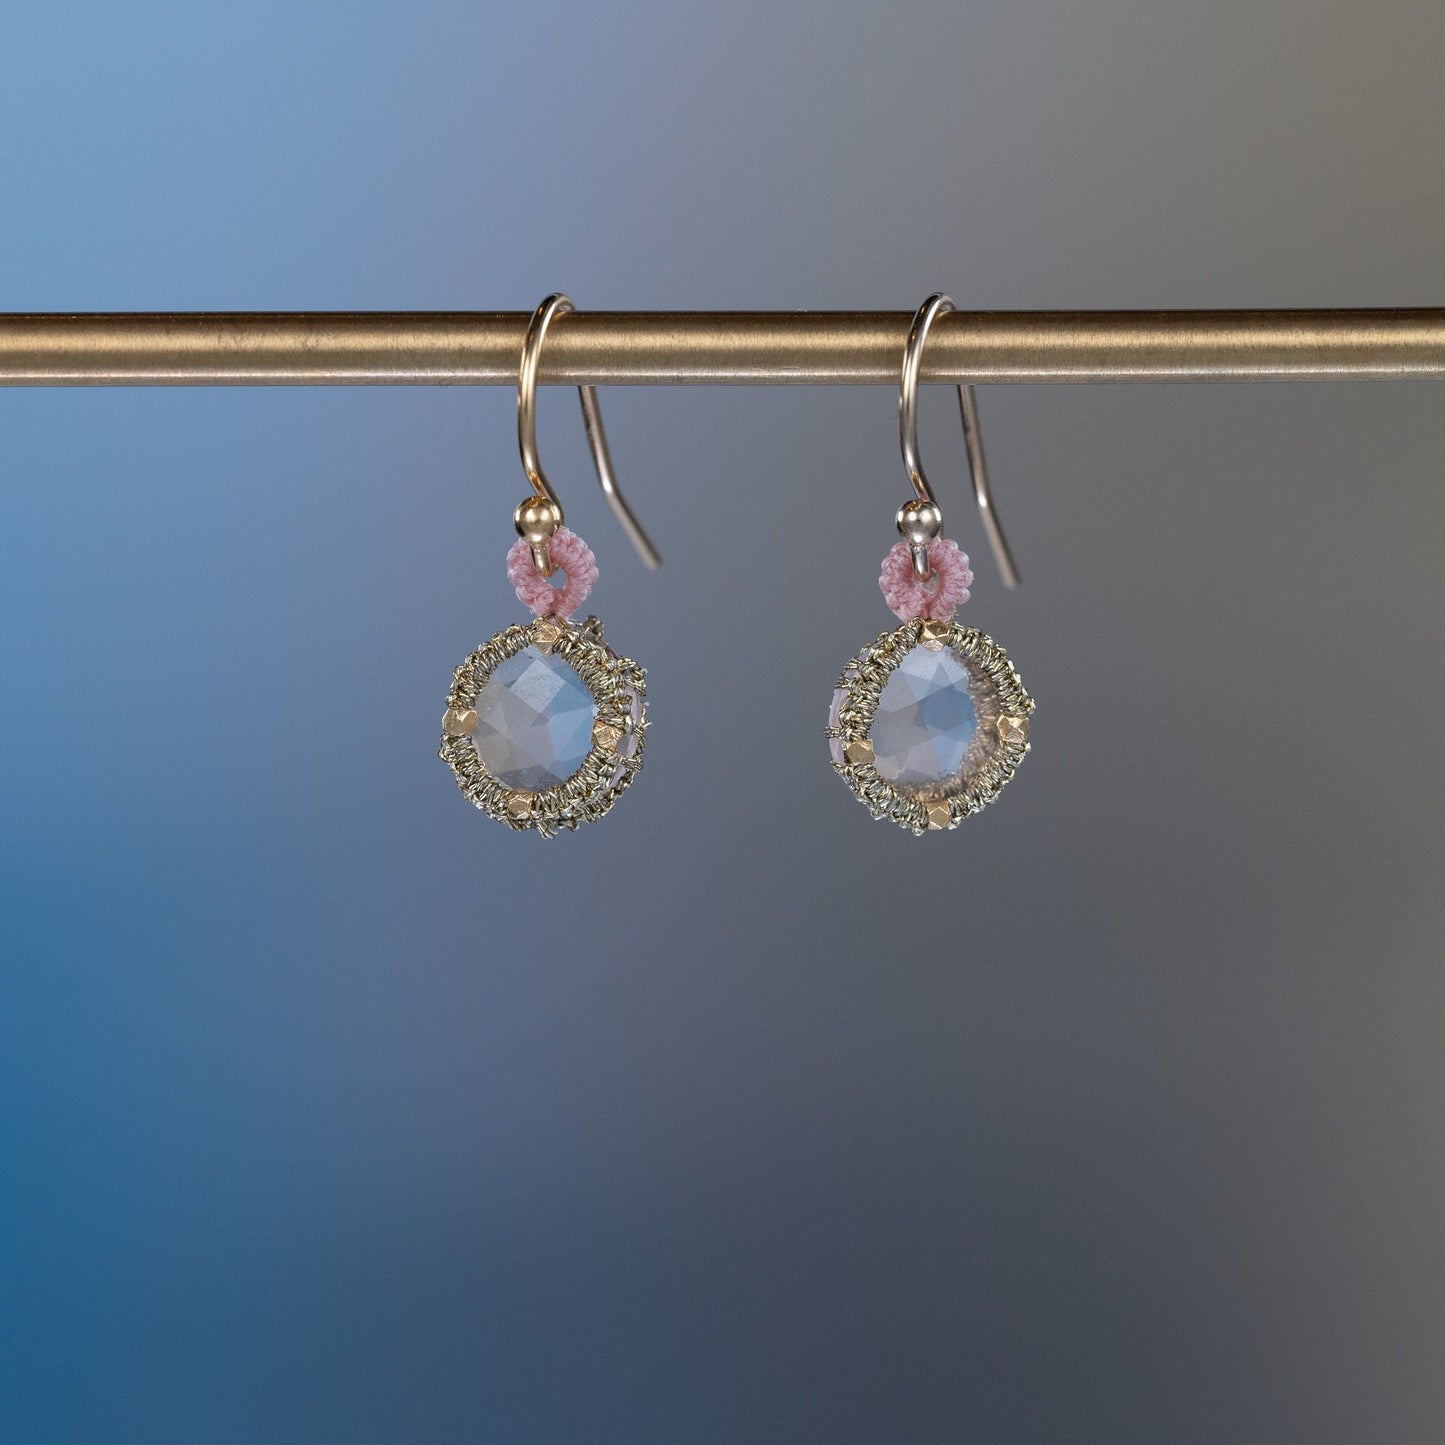 Danielle Welmond Caged Rose Quartz Earrings with Coordinating Soft Pink Silk